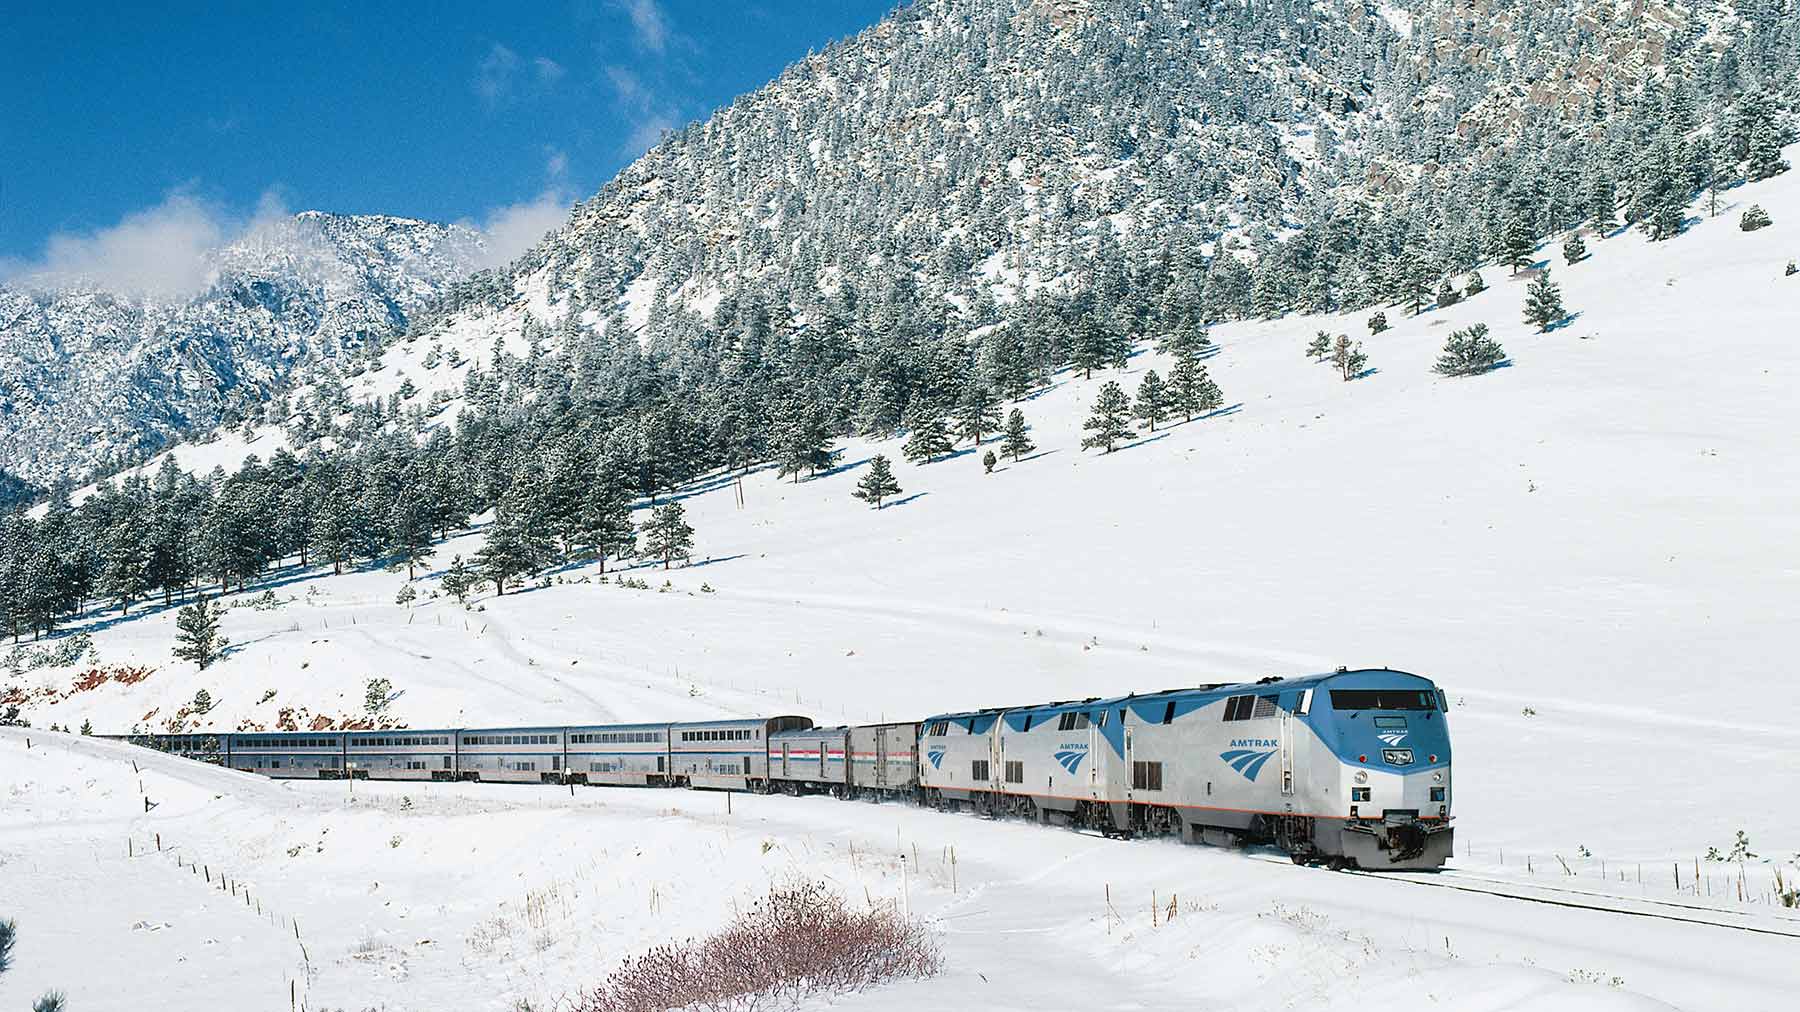 The California Zephyr Connects San Francisco to Chicago every day, passing through Nevada on its way.